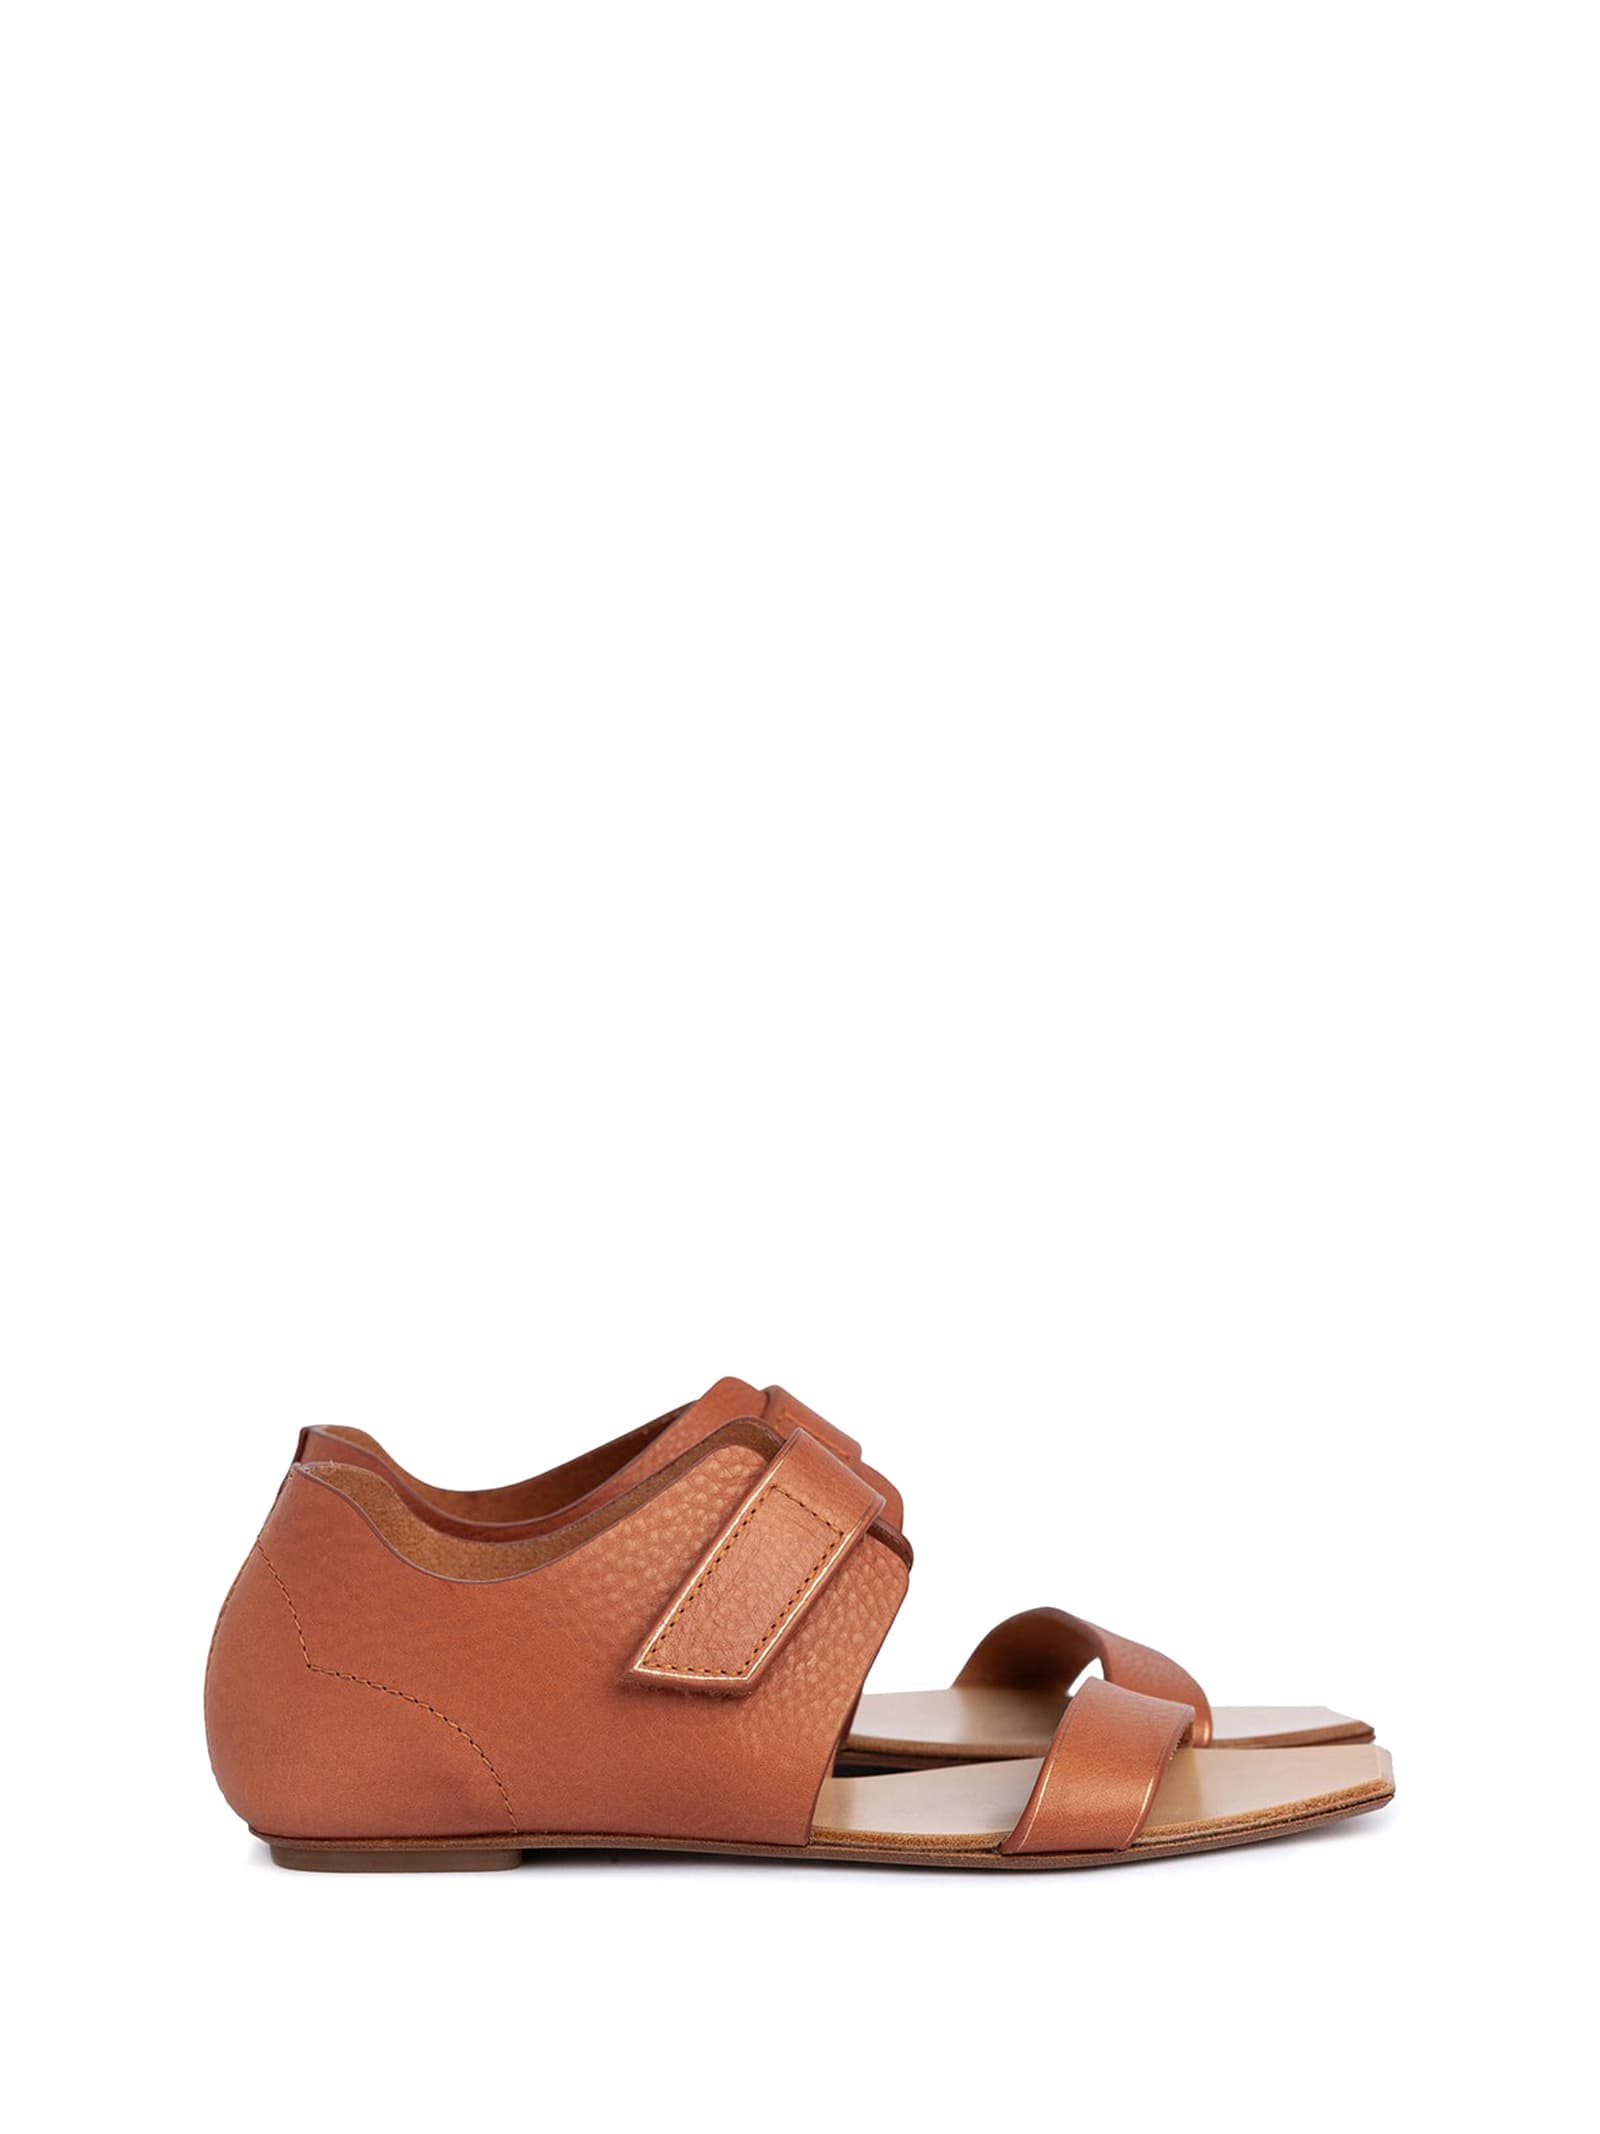 Vivi Flat Sandal In Tanned Leather